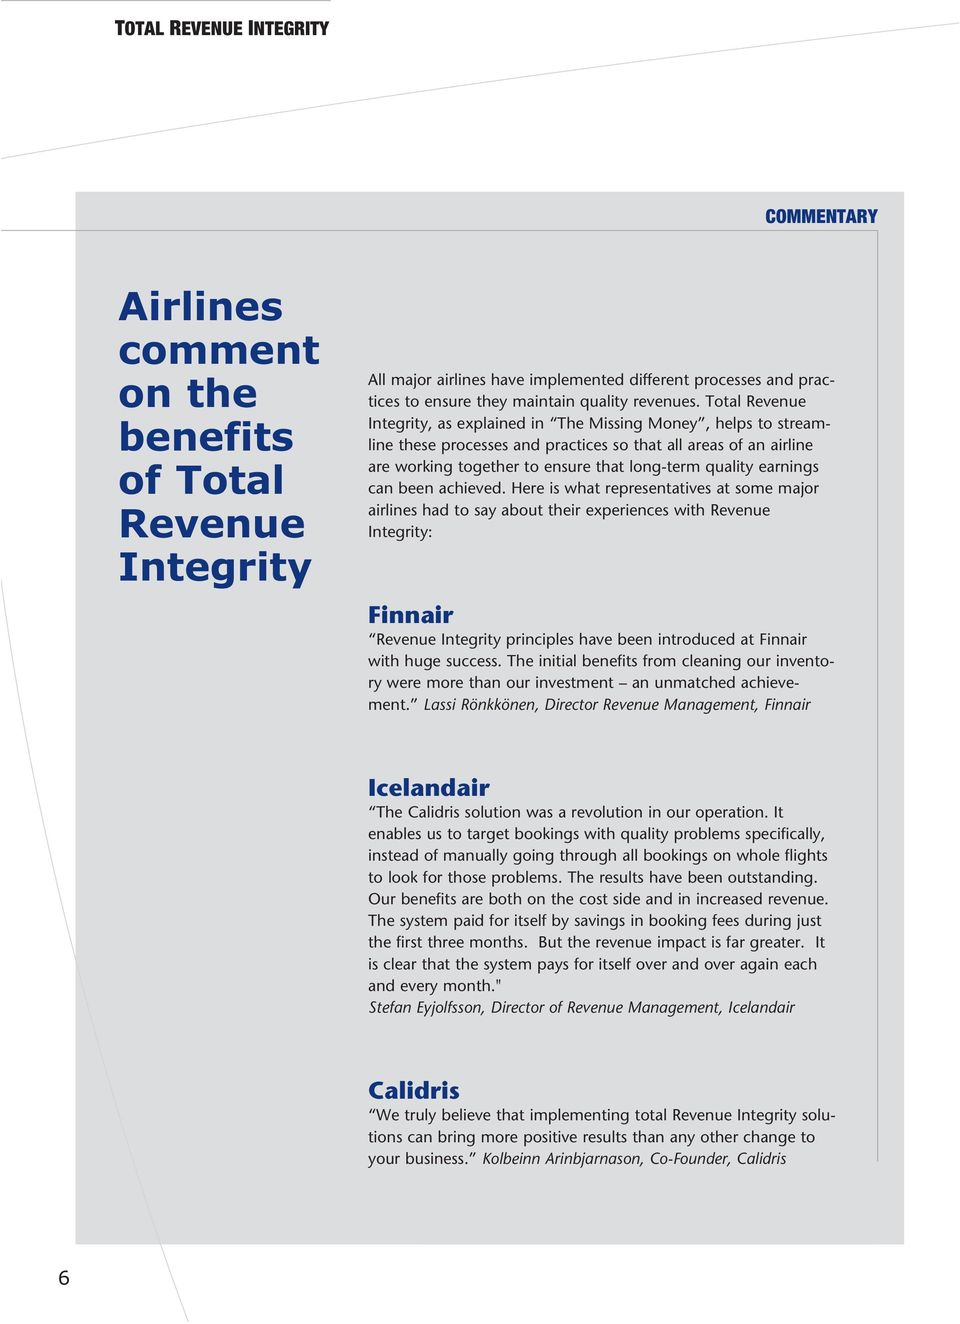 Total Revenue Integrity, as explained in The Missing Money, helps to streamline these processes and practices so that all areas of an airline are working together to ensure that long-term quality